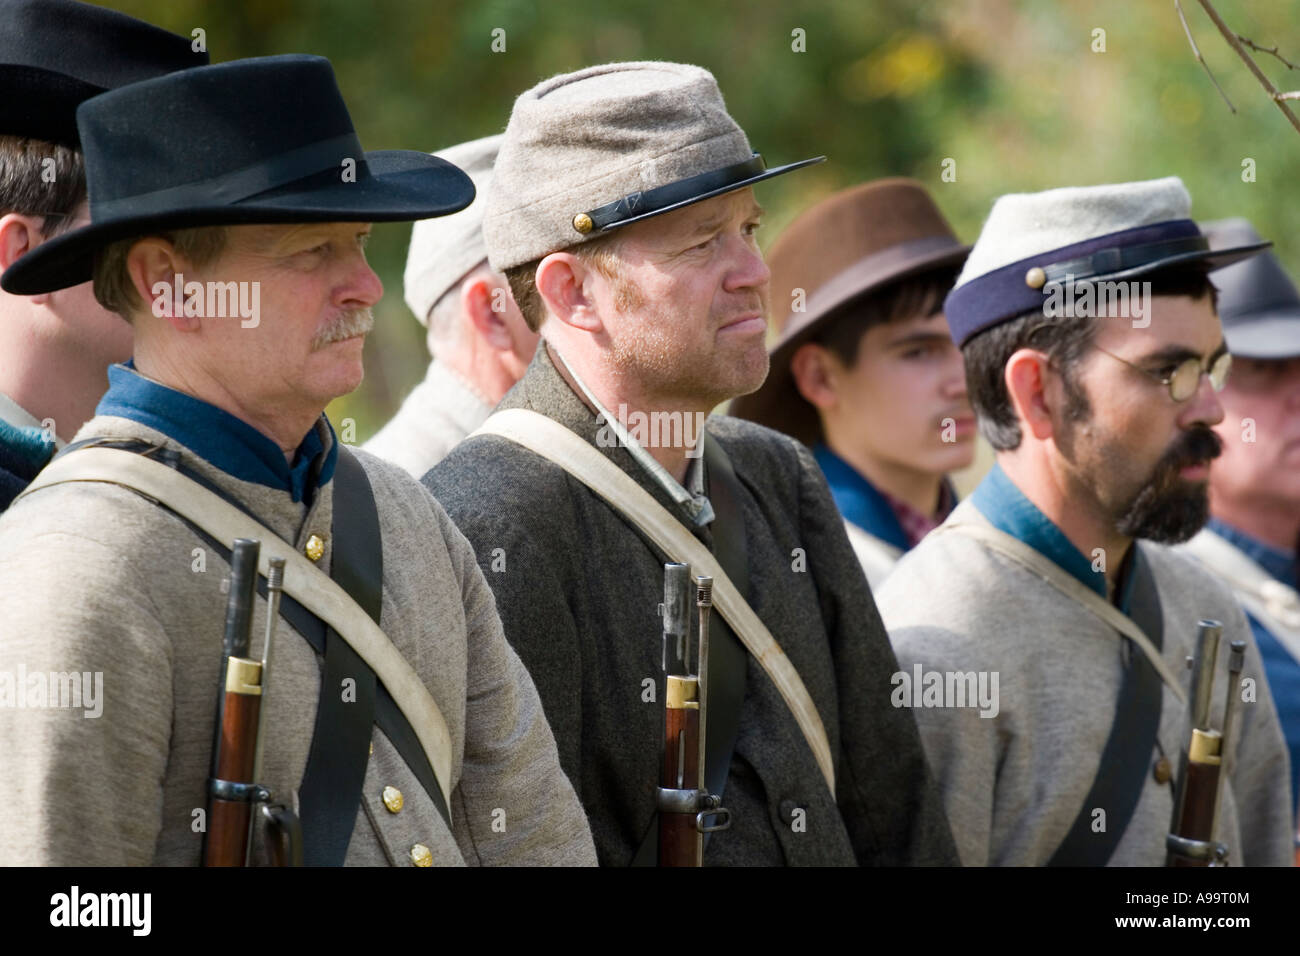 Arkansas AR USA Old Washington State Park Civil War Weekend Confederate soldiers marching to the battle Stock Photo